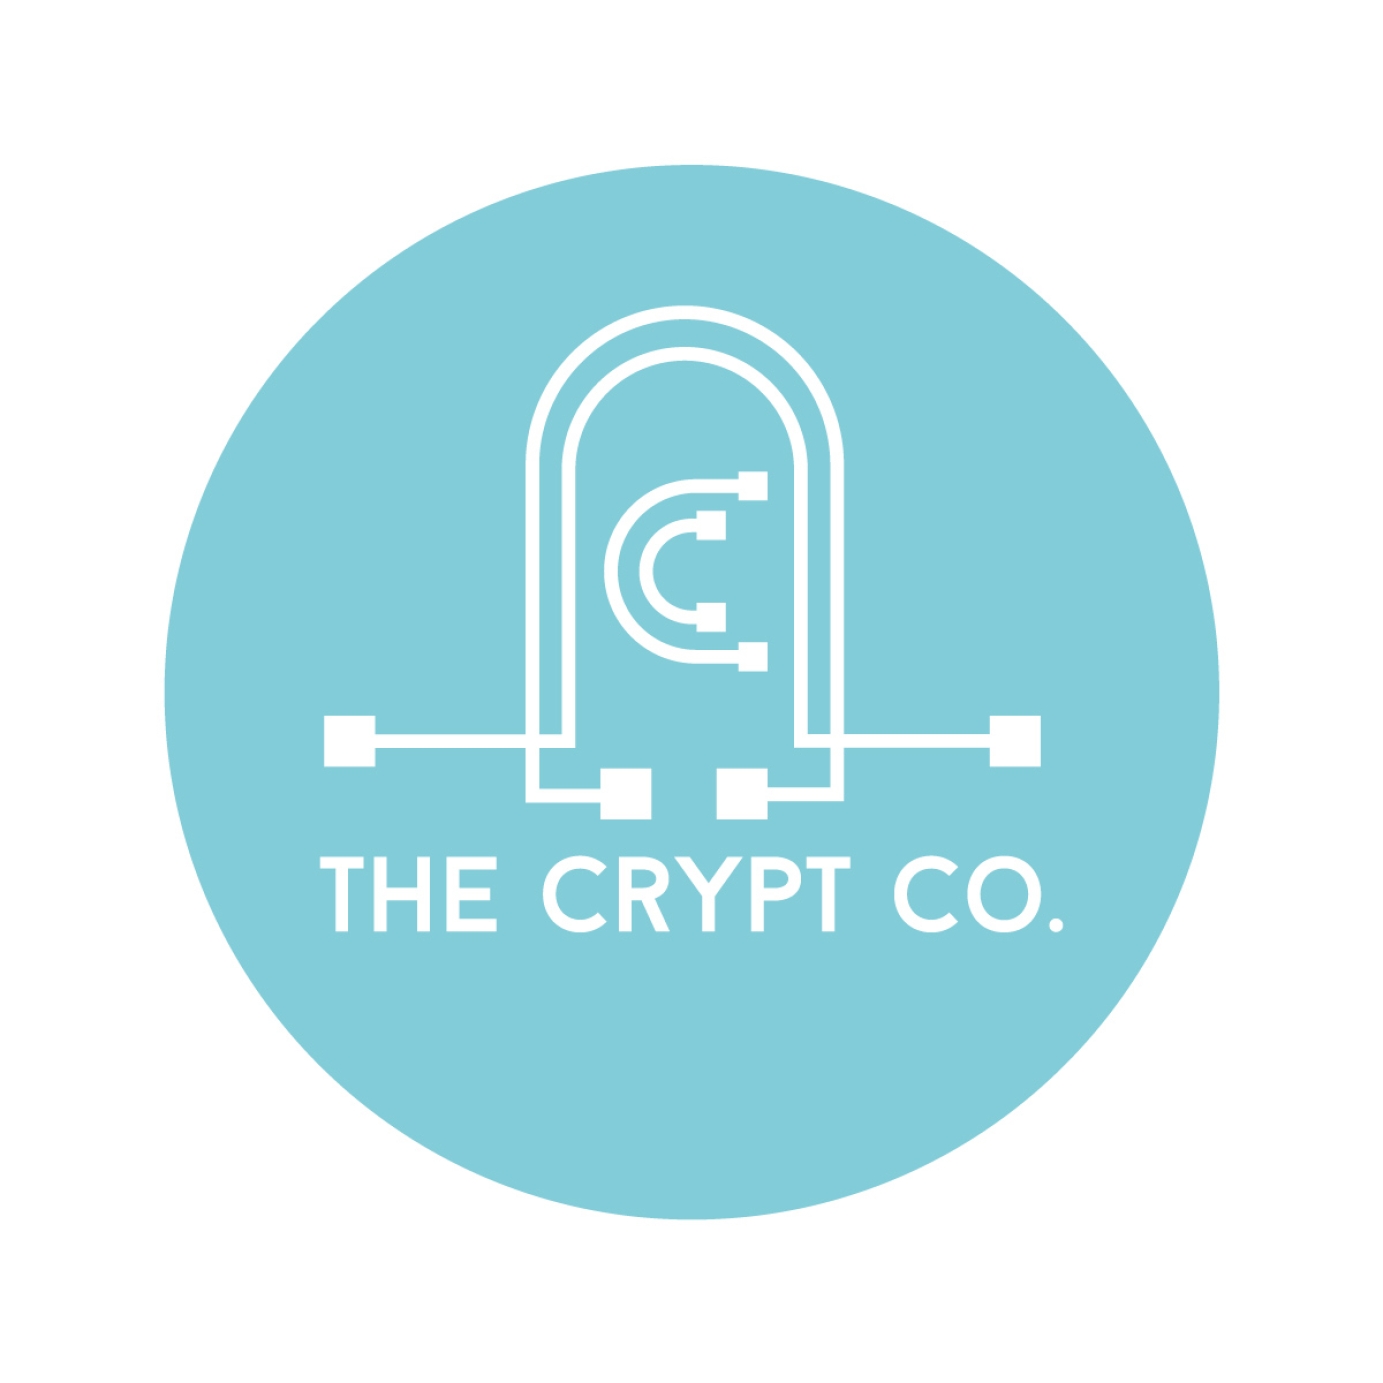 The Crypt Co.